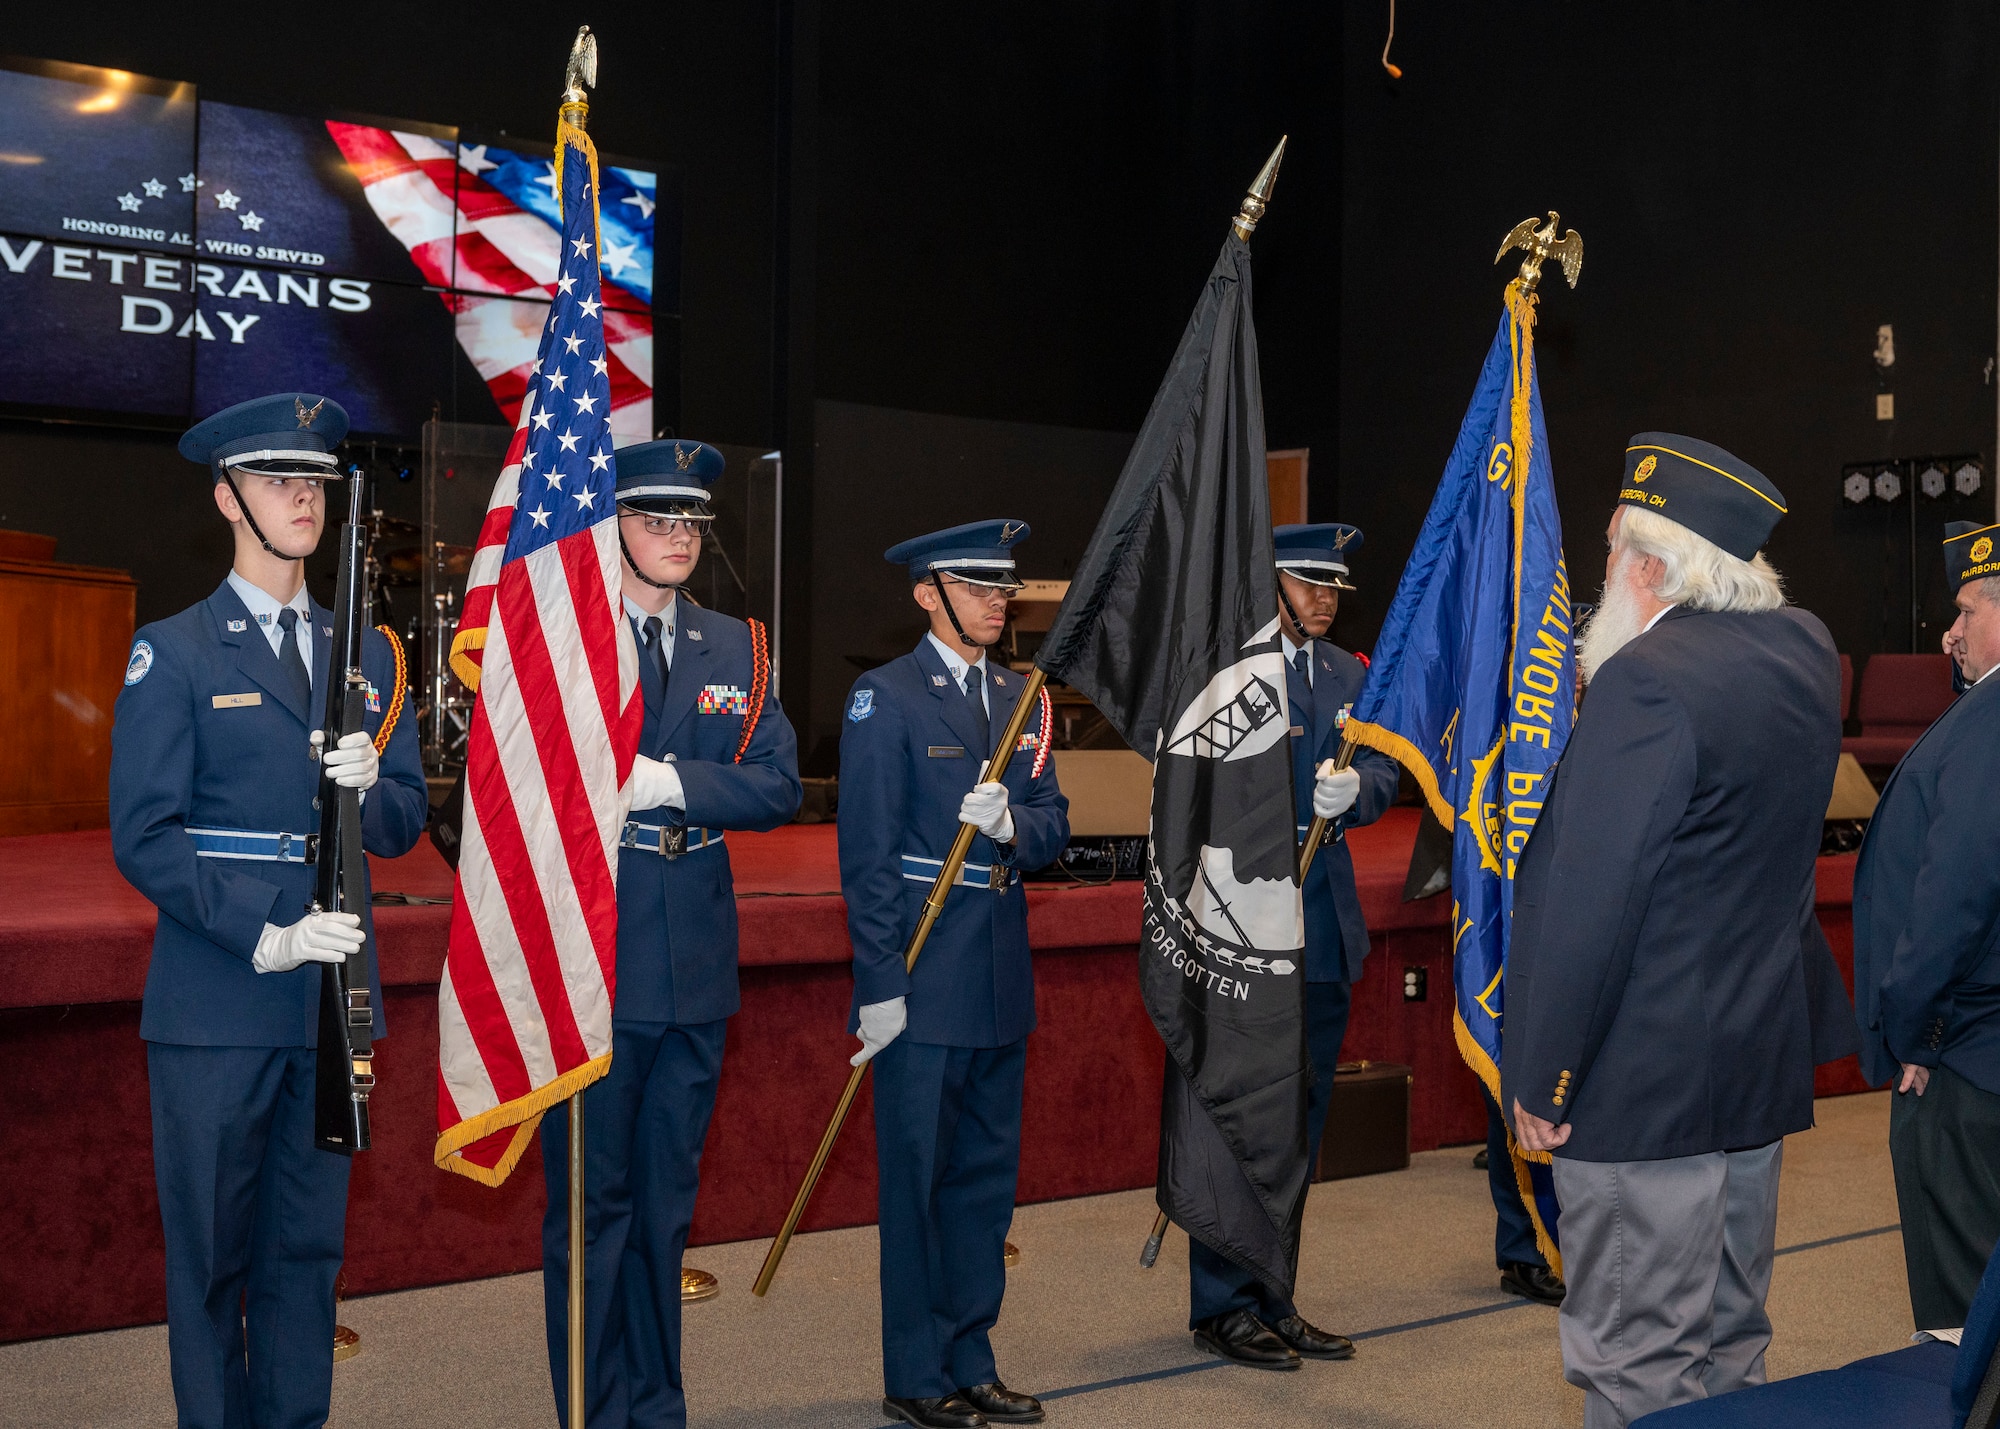 The Fairborn High School Air Force Junior Reserve Officer Training Corps presents the colors during a Veterans Day ceremony at the United Methodist Church in Fairborn, Ohio, Nov. 11, 2023. Fairborn American Legion Post 526 hosted the event. (U.S. Air Force photo by Staff Sgt. Mikaley Kline)